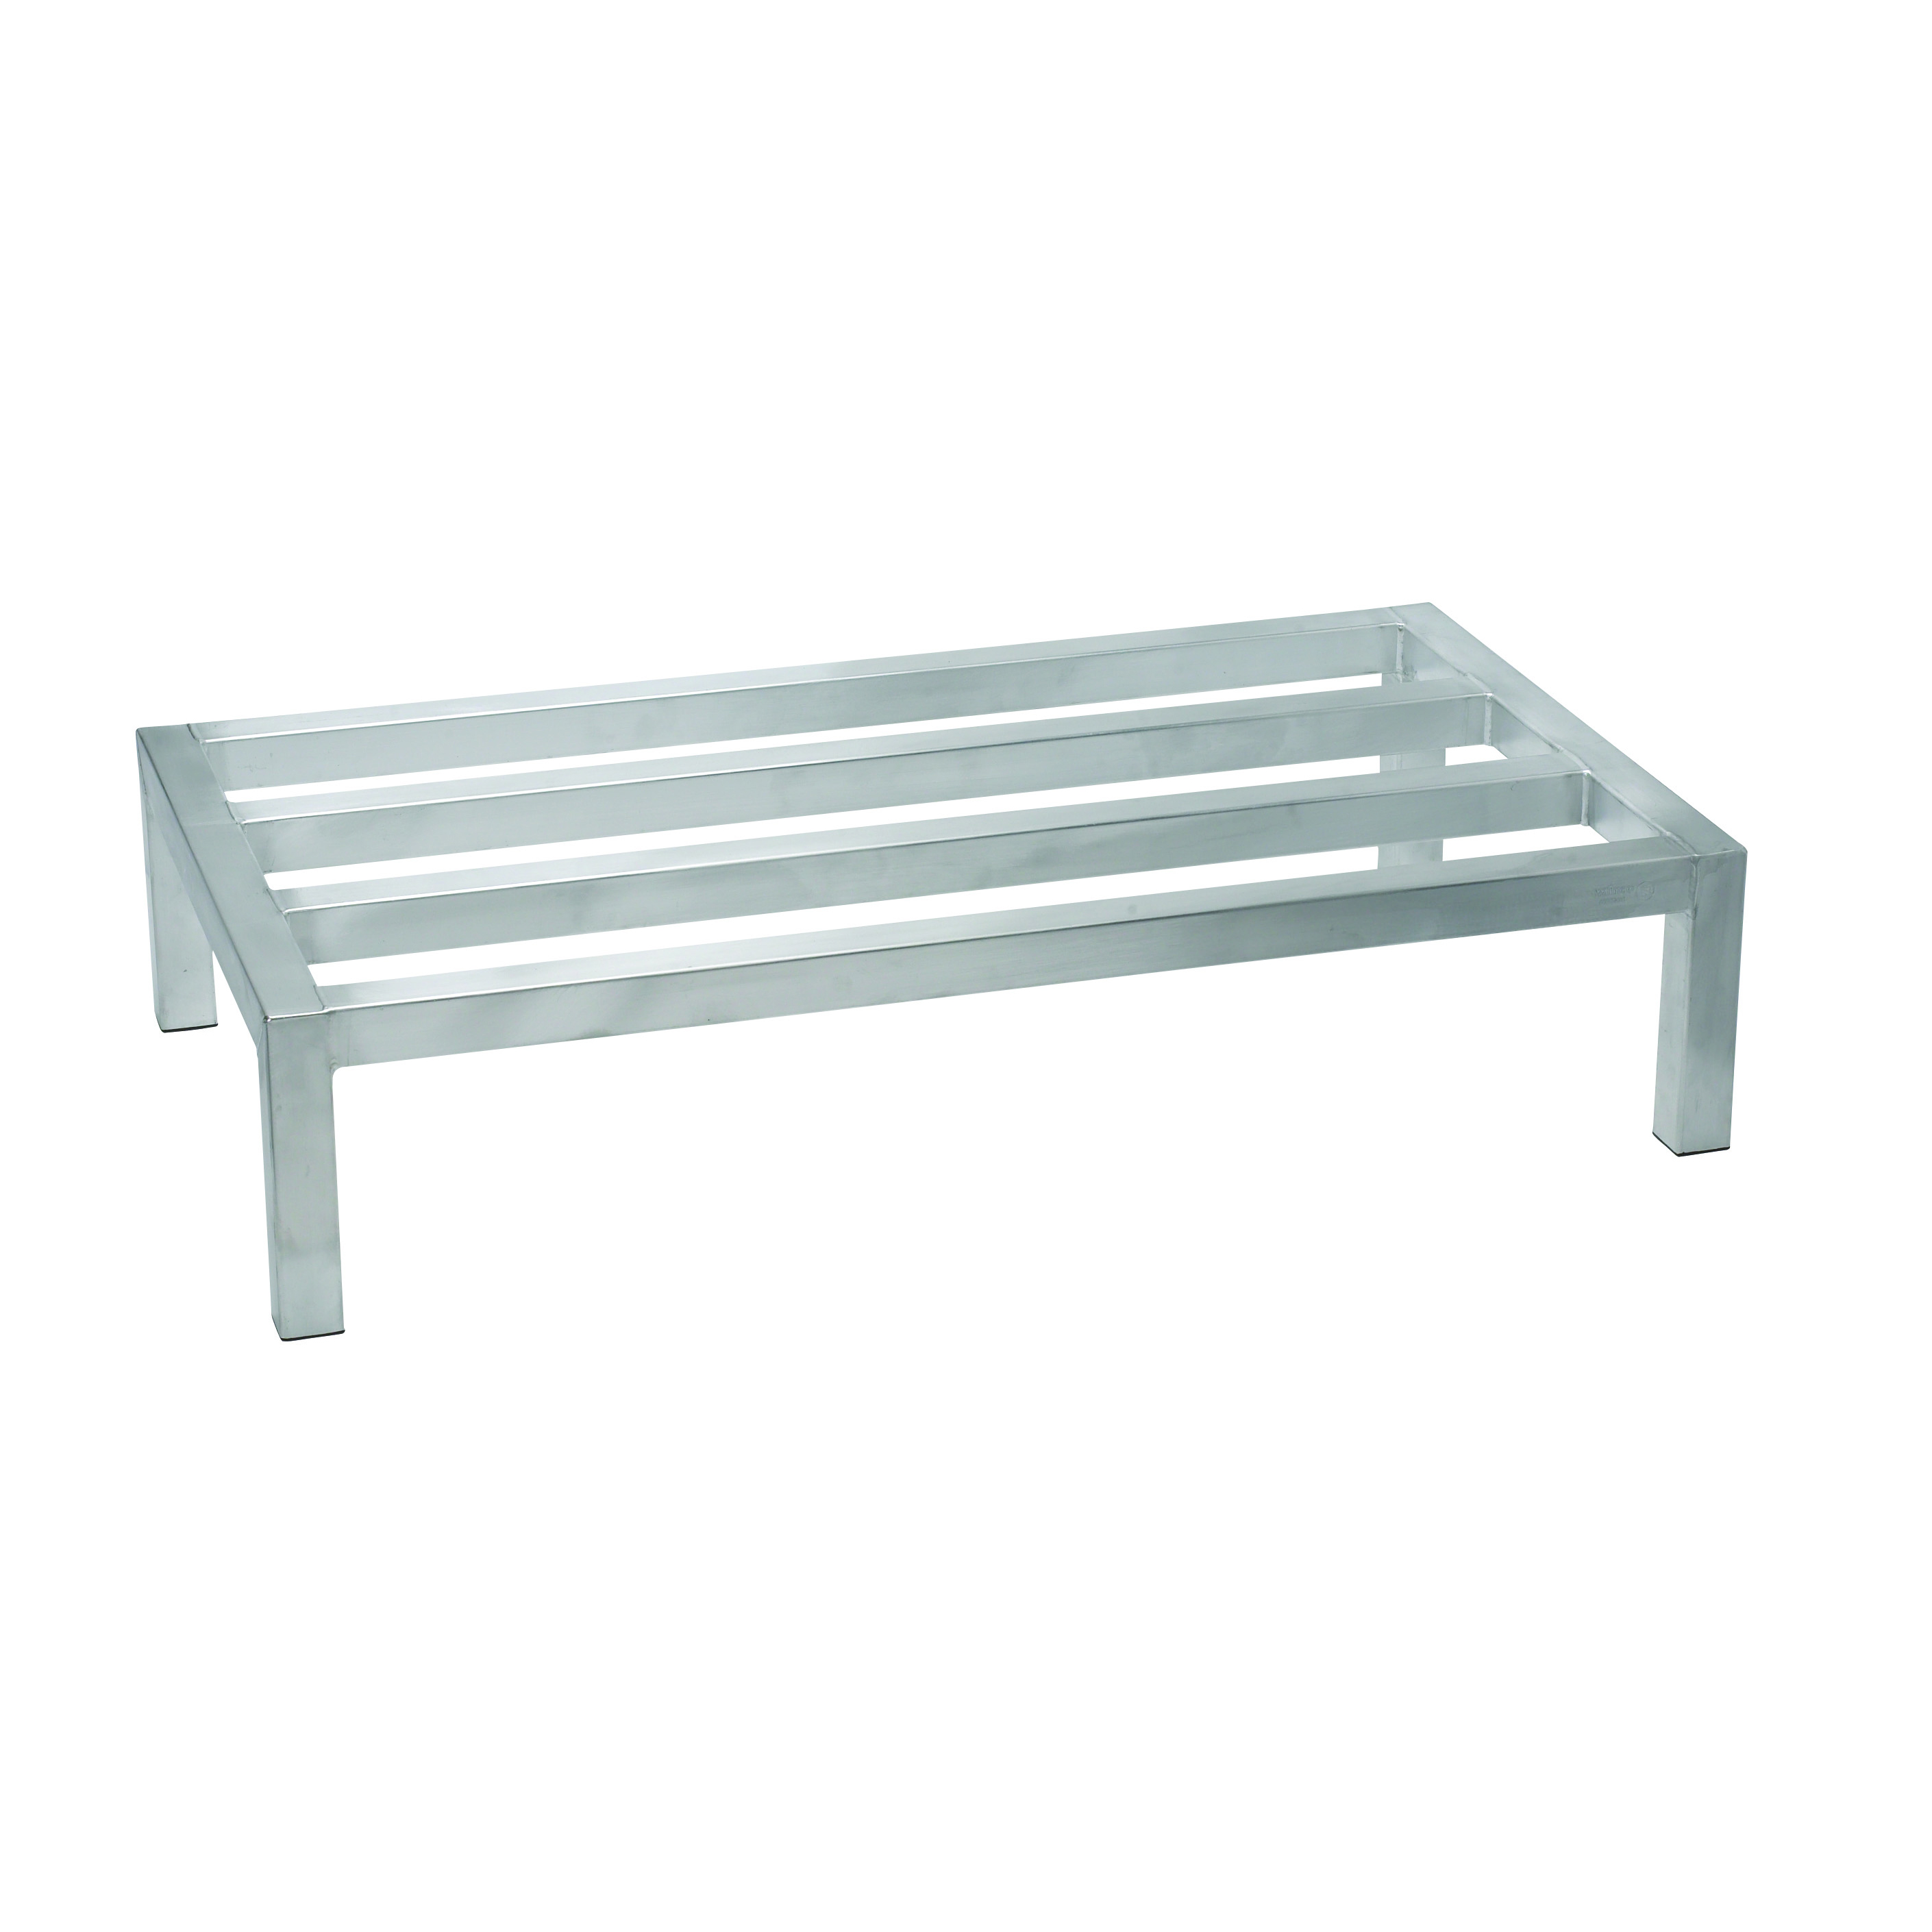 14&quot; X 24&quot; X 8&quot;DUNNAGE RACK, HOLDS UP TO 1200